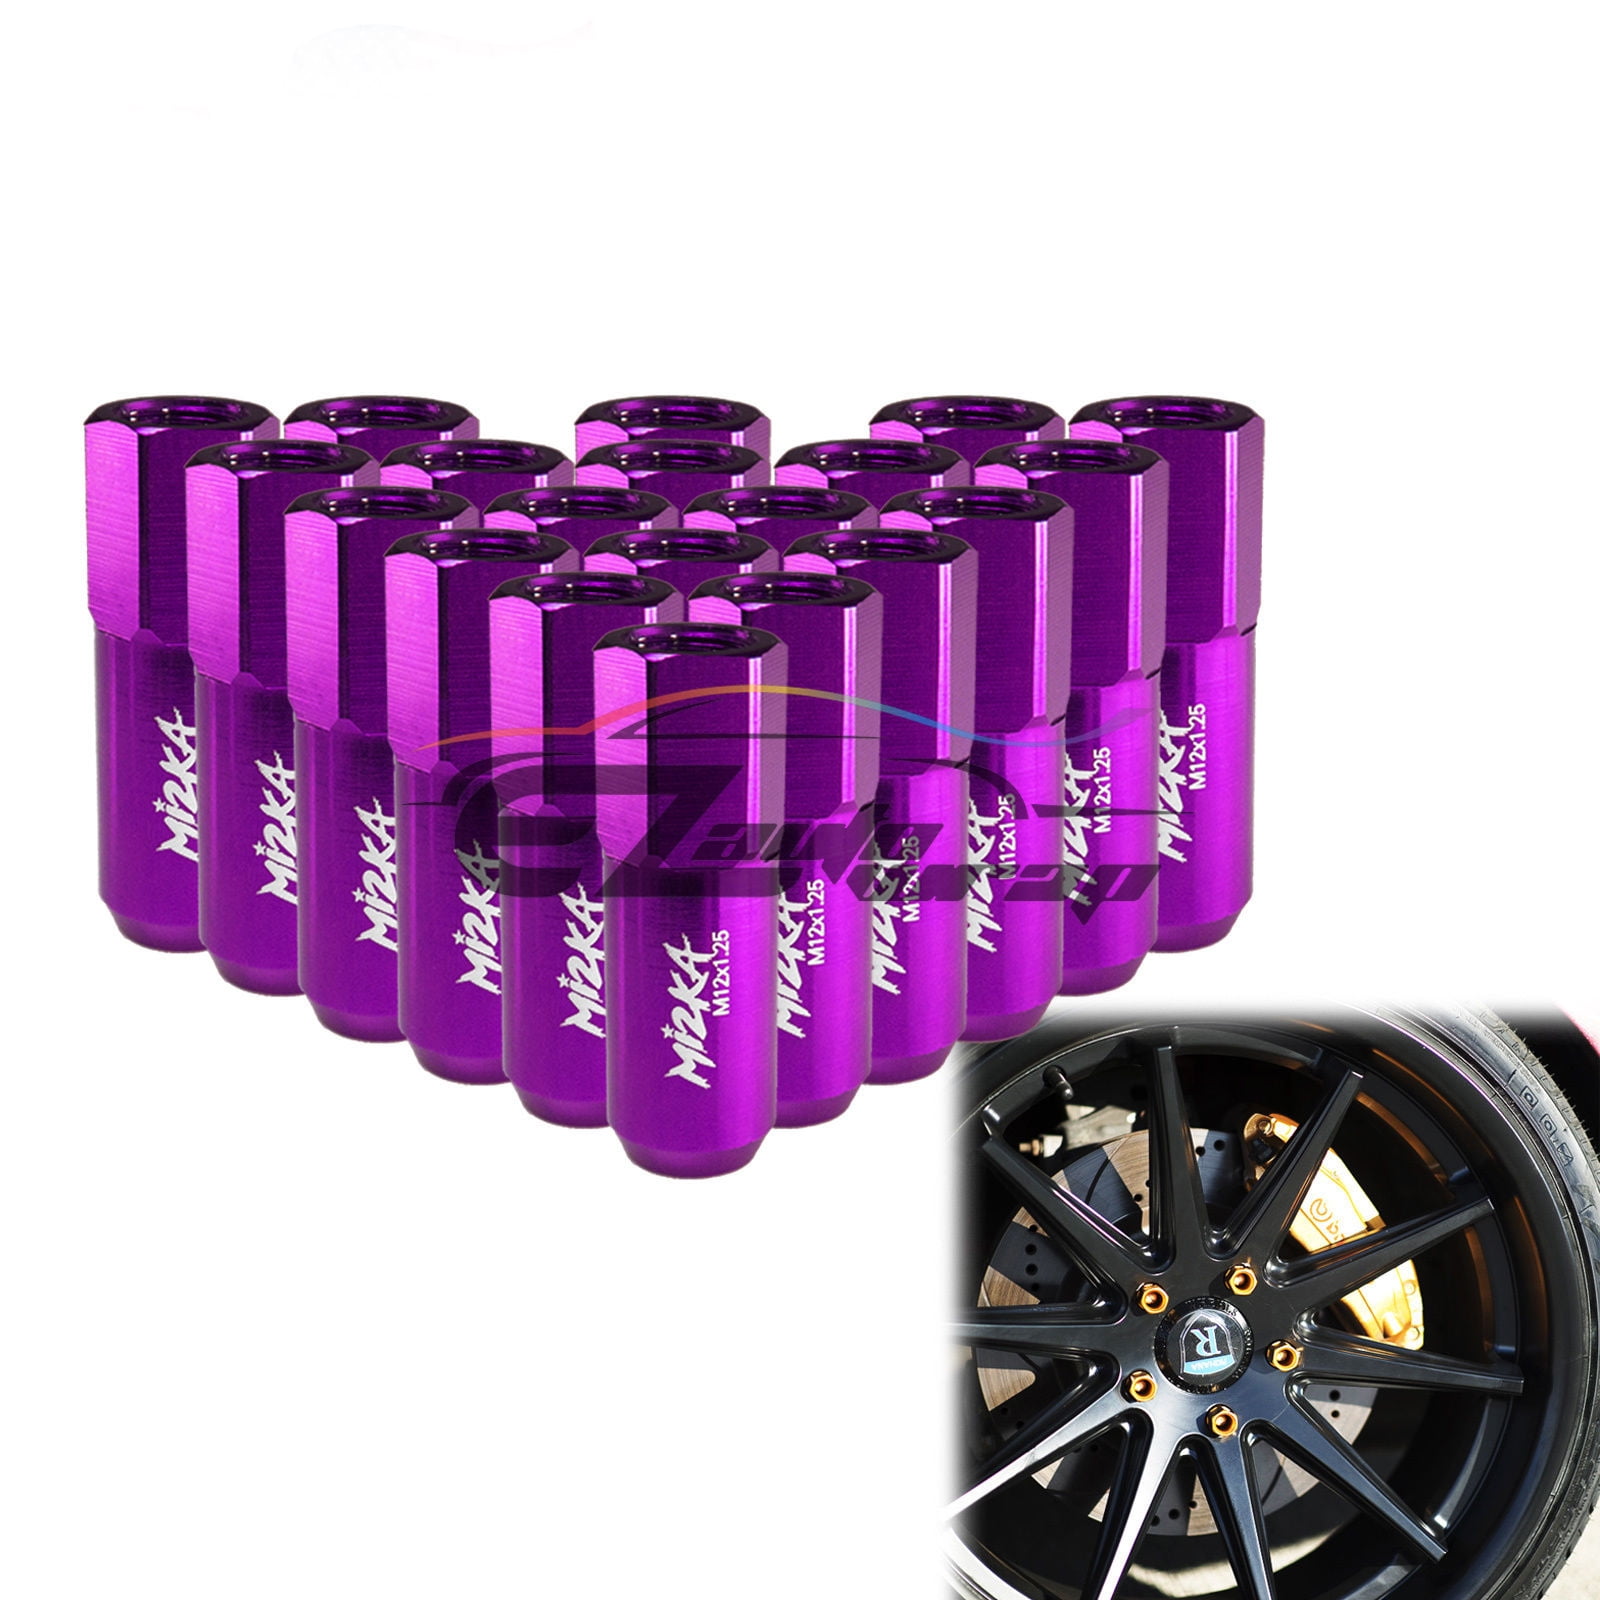 JDMBESTBOY Purple 20 PCS M12x1.25 Lug Nuts Spiked 60mm Extended Tuner Aluminum Wheels Rims Cap WN03 